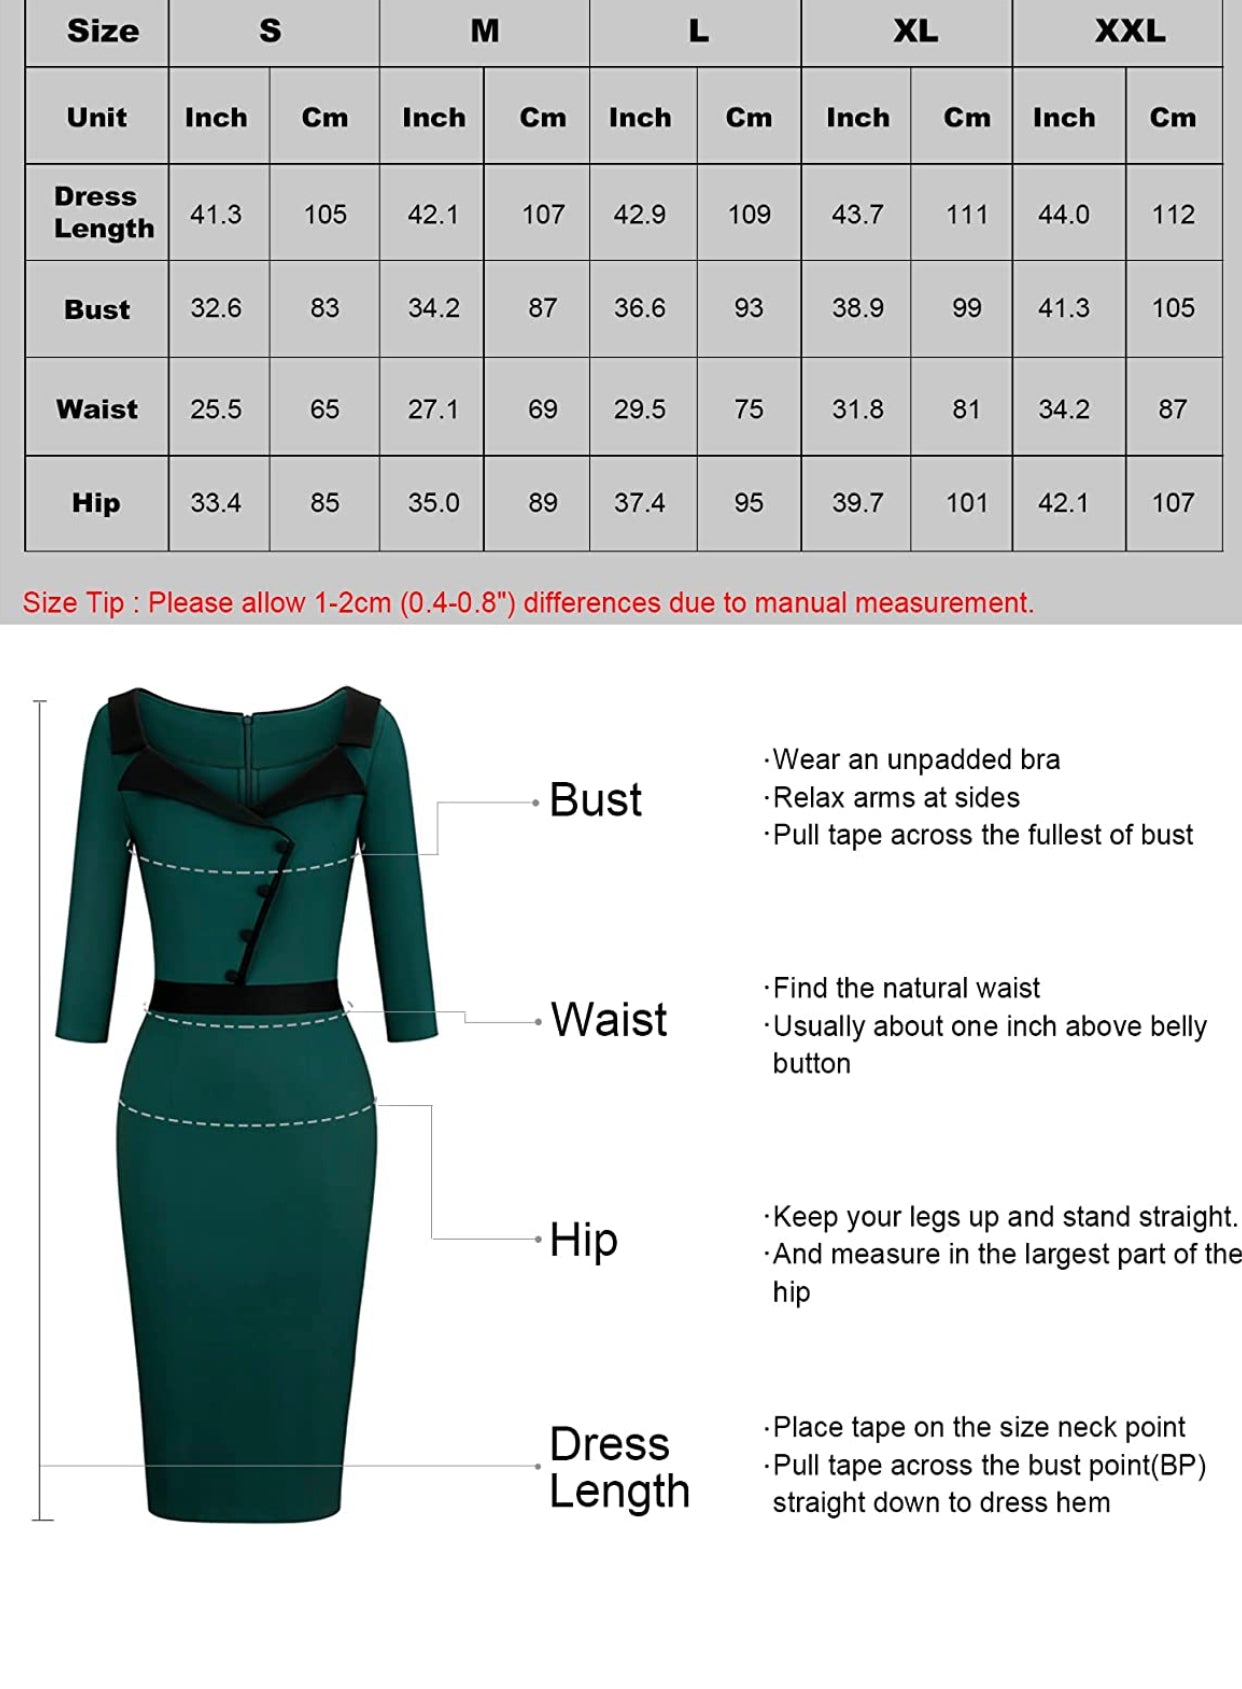 Green Vintage Inspired 3/4 Sleeve BodyCon Dress Sizes Small - 2XLarge (US 4 - 18)